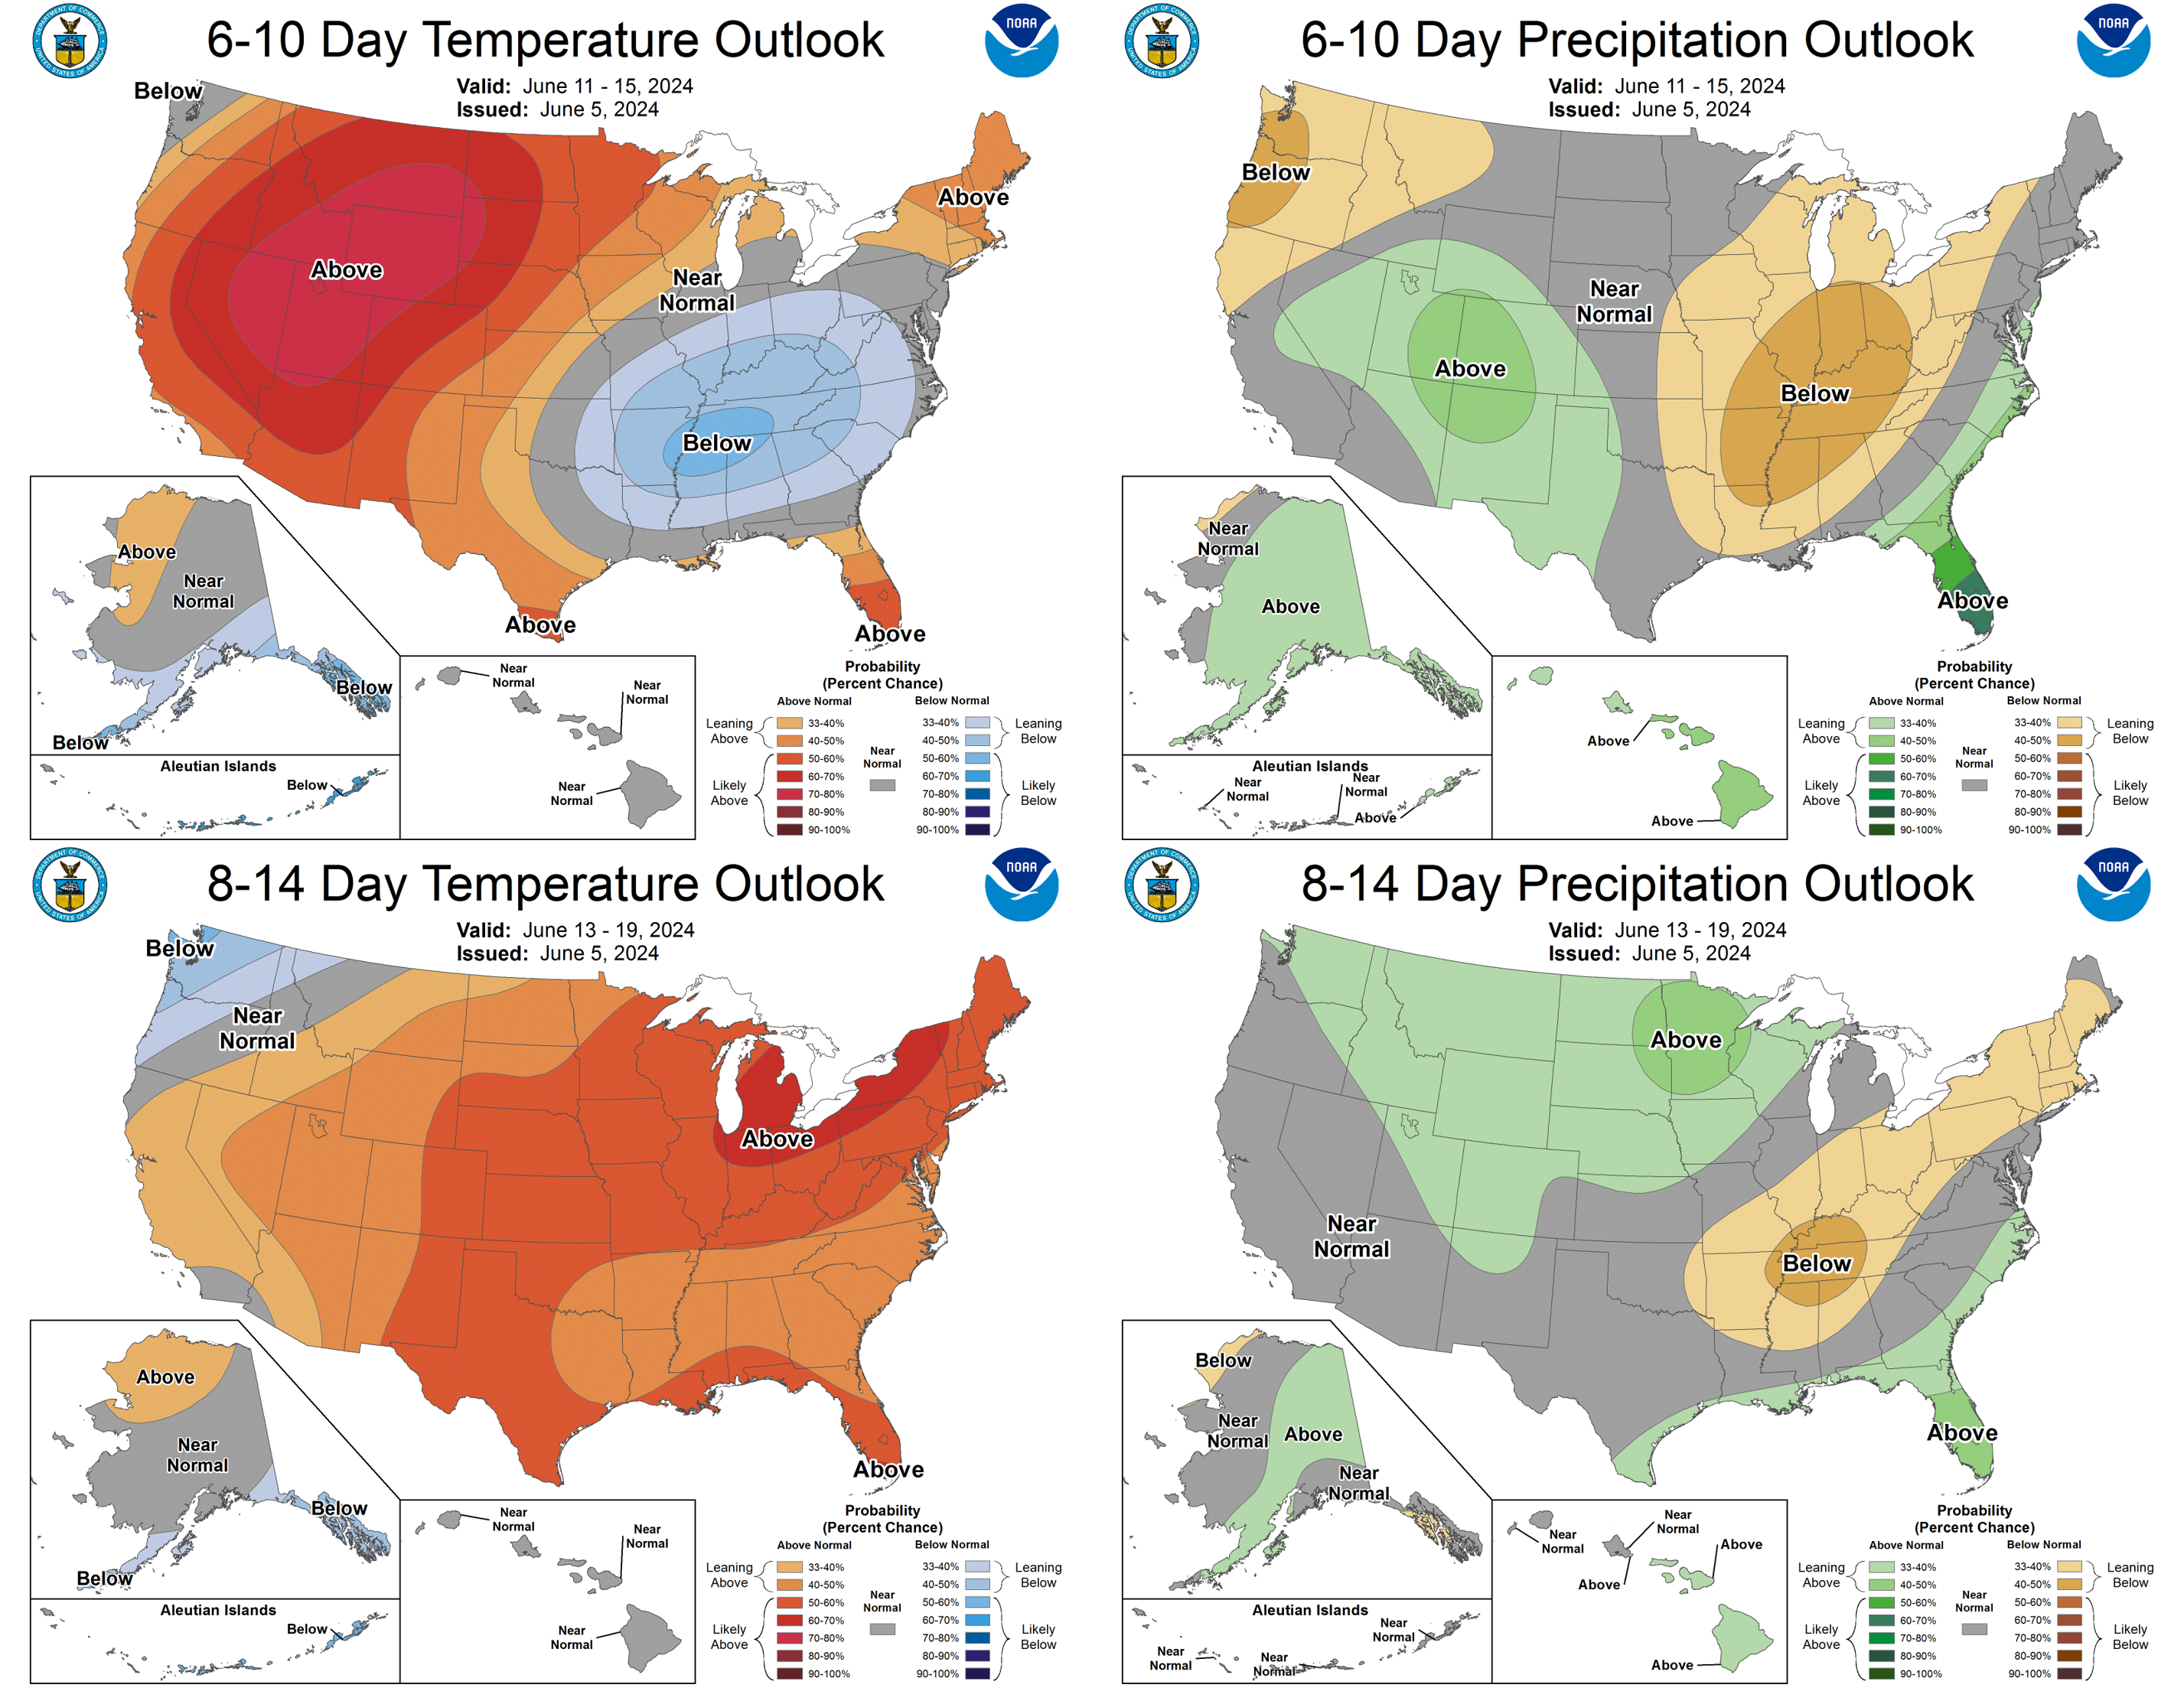 6-10 and 8-14 day outlook.